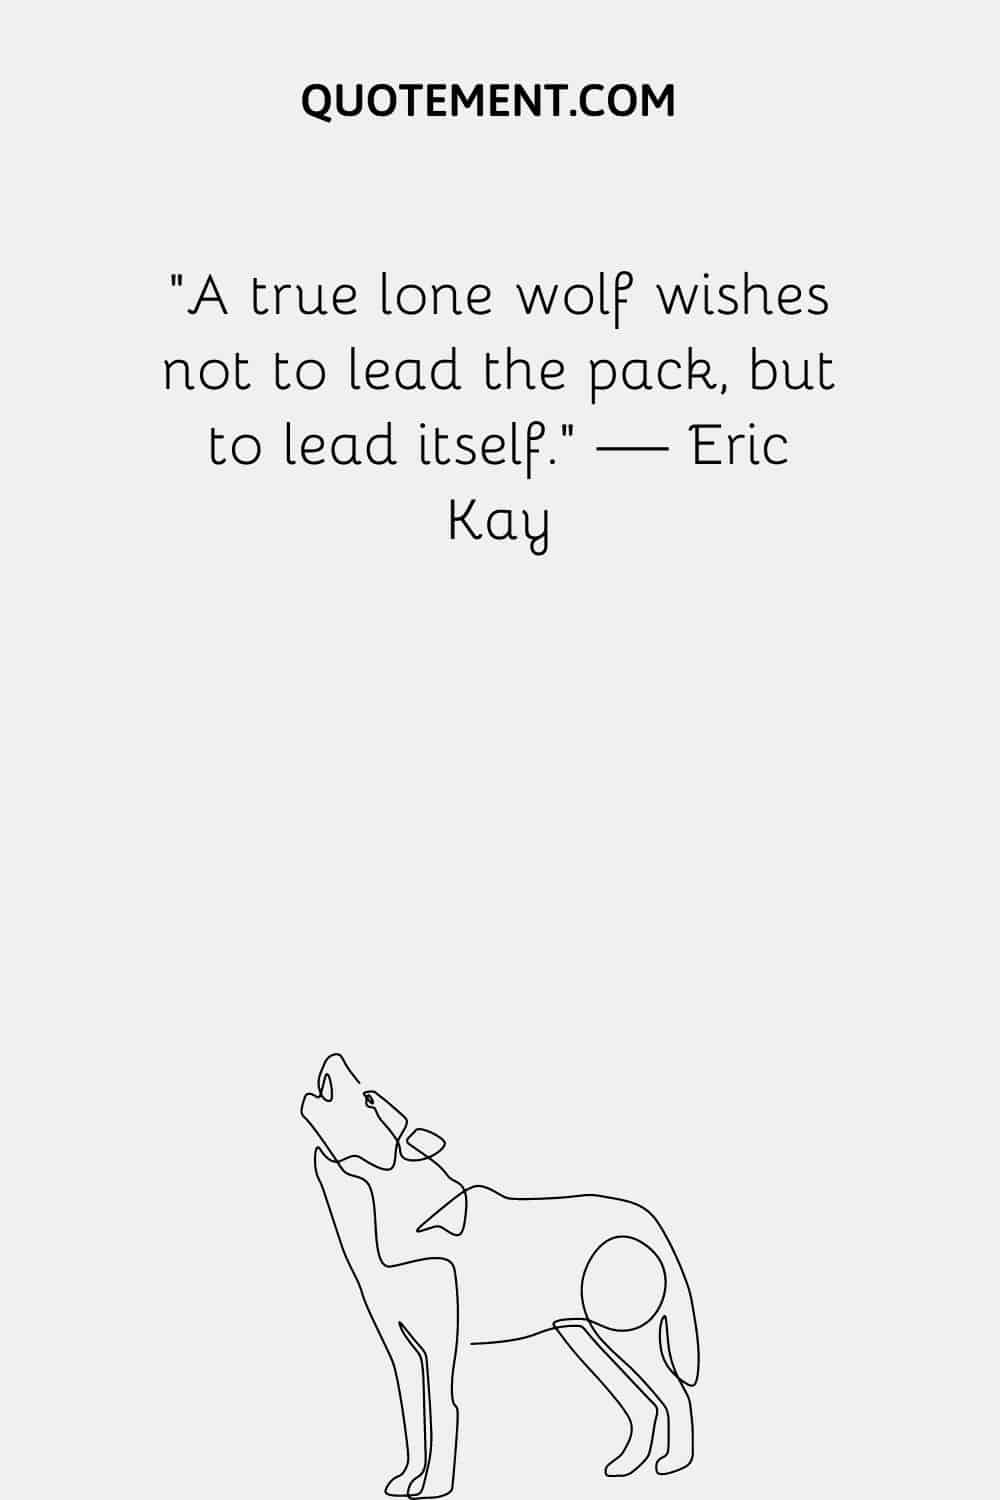 A true lone wolf wishes not to lead the pack, but to lead itself.